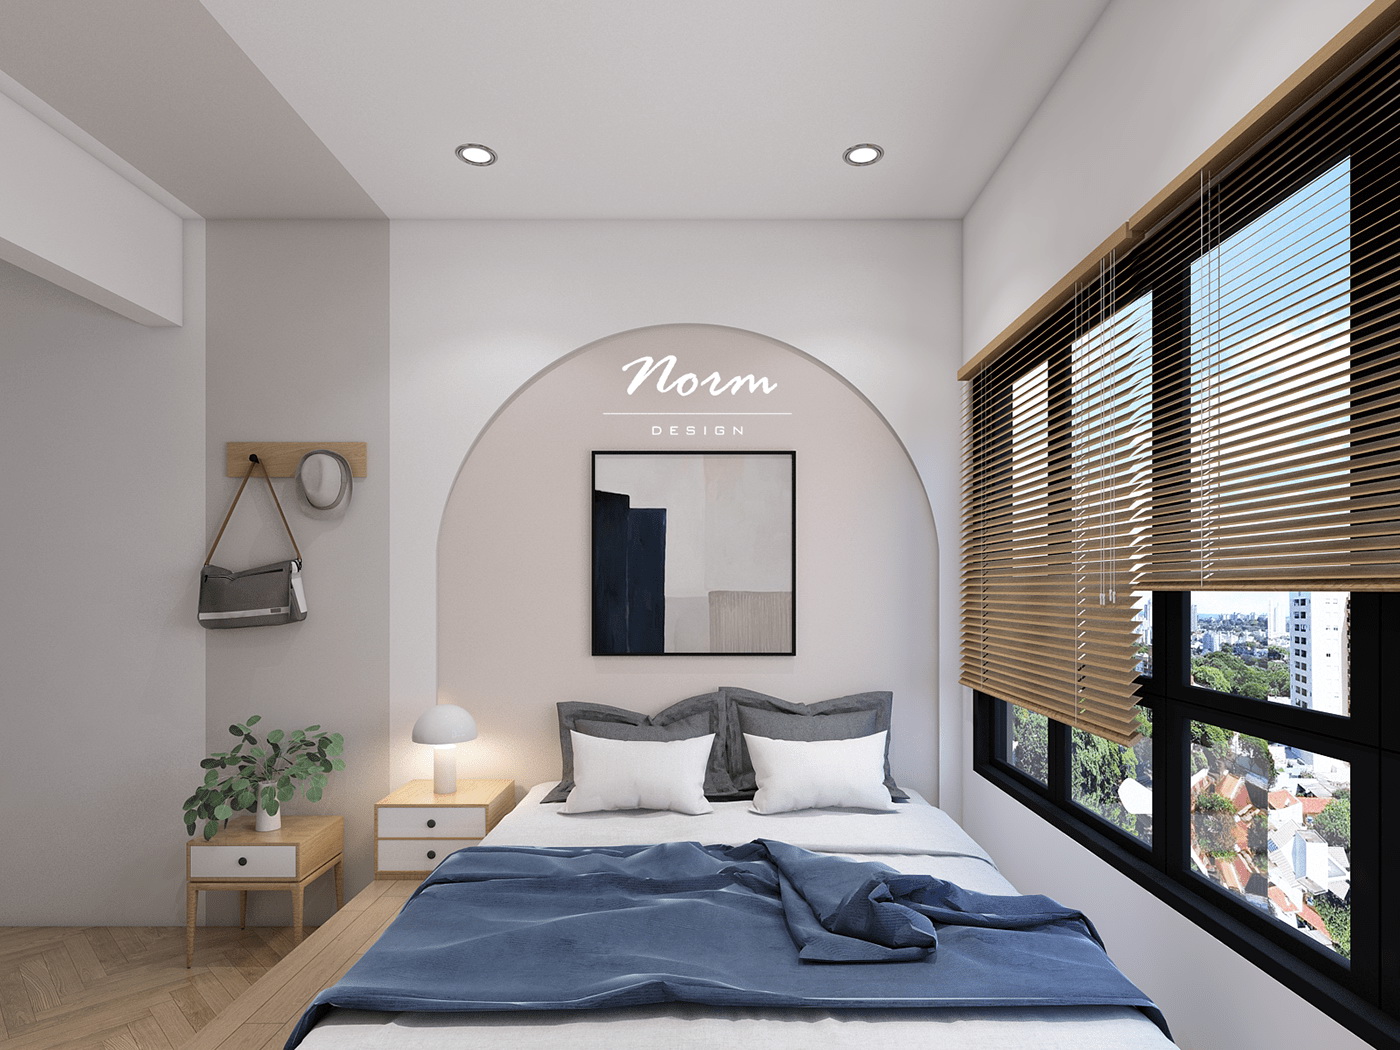 Monochromatic colors are used in the Scandinavian style bedroom, which helps to make the space more comfortable and cozy. With the addition of a large window with wooden shutters for privacy, natural light is fully utilized.